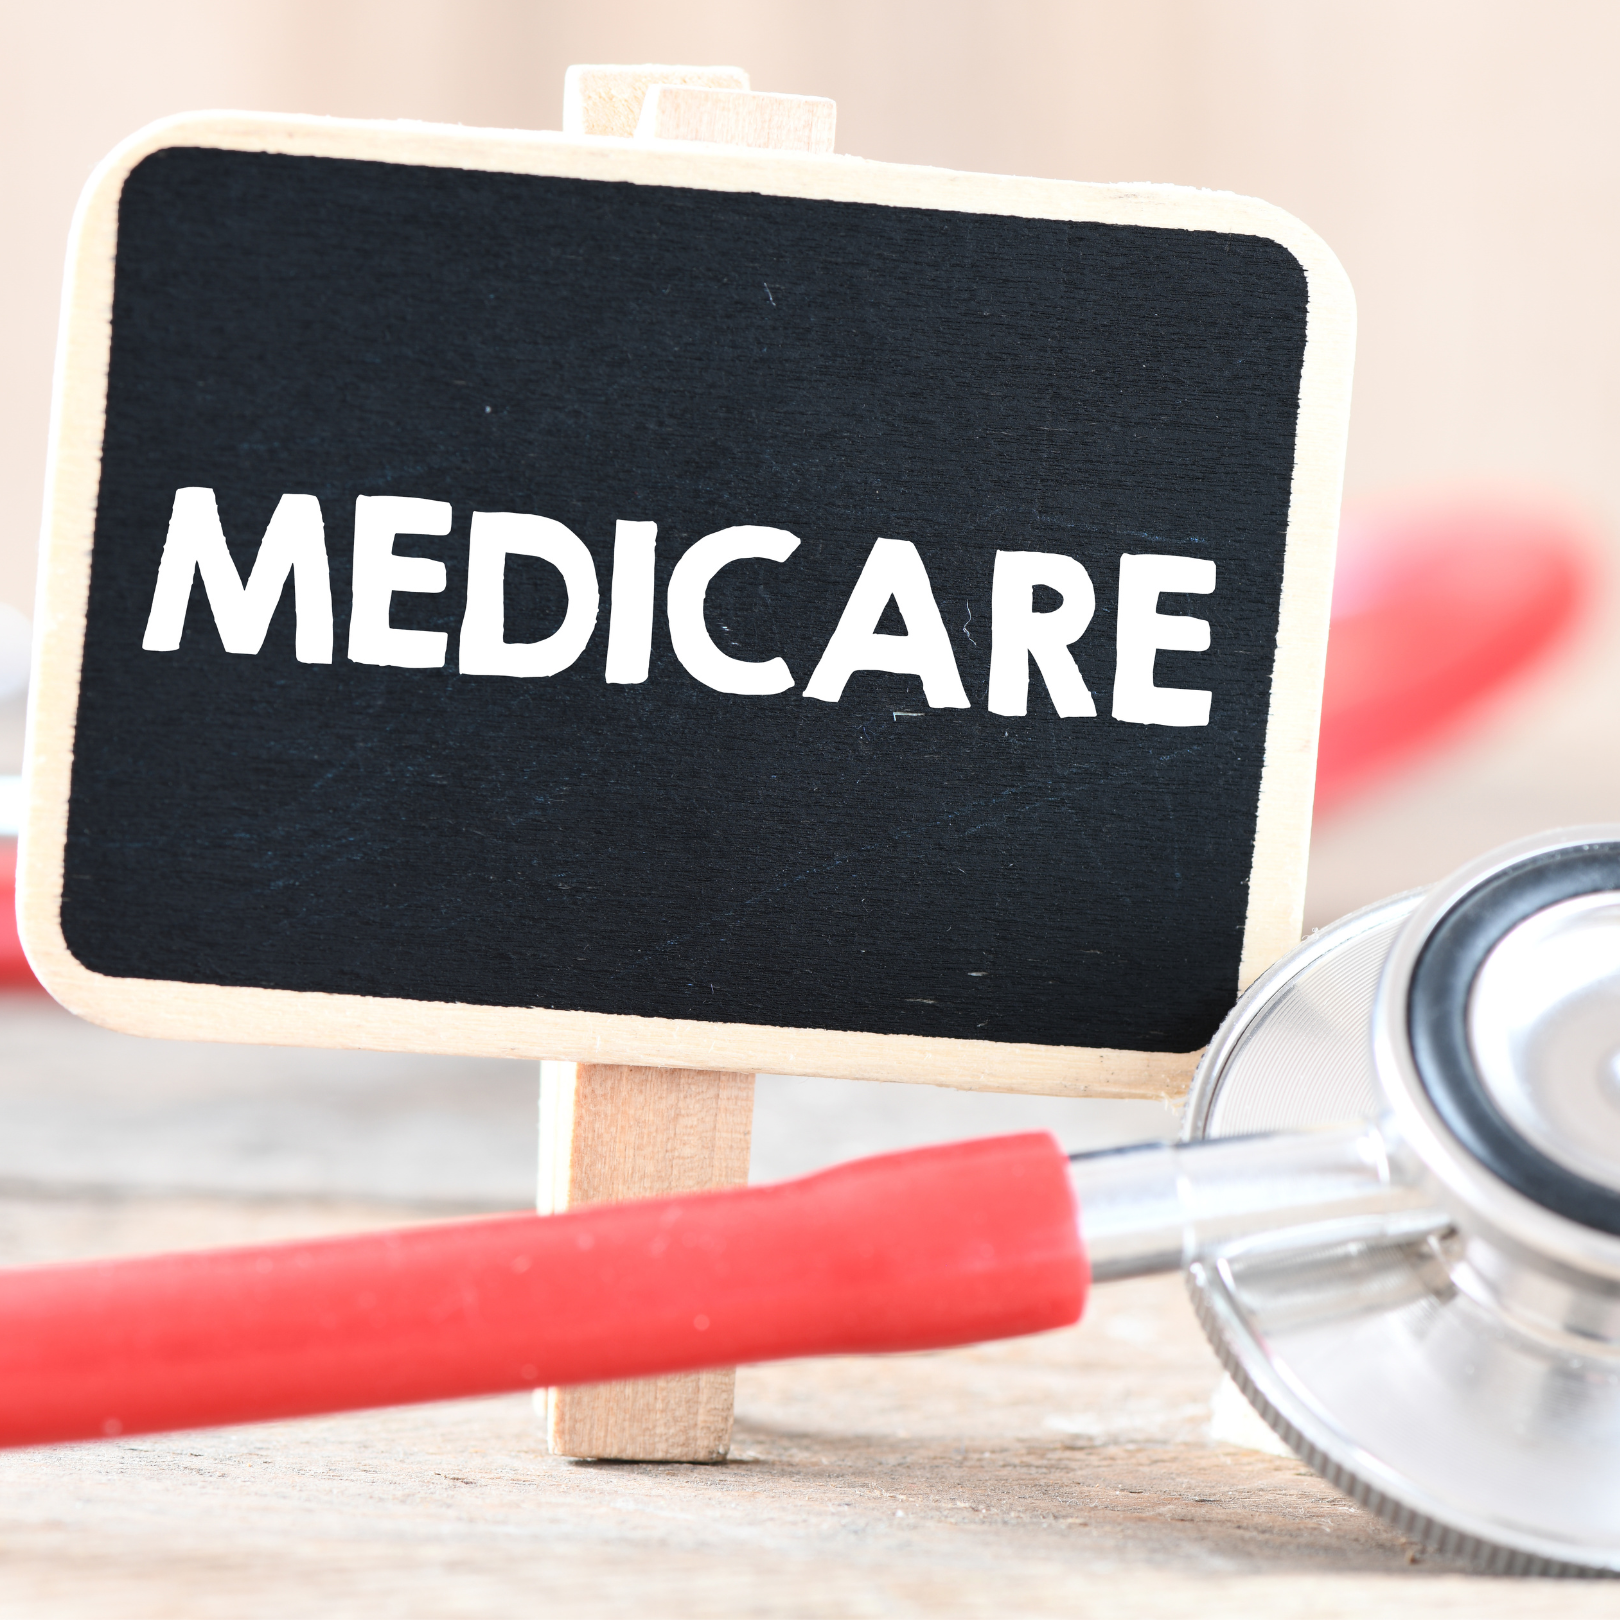 You are invited to learn about Medicare options with Roberta Trovinger